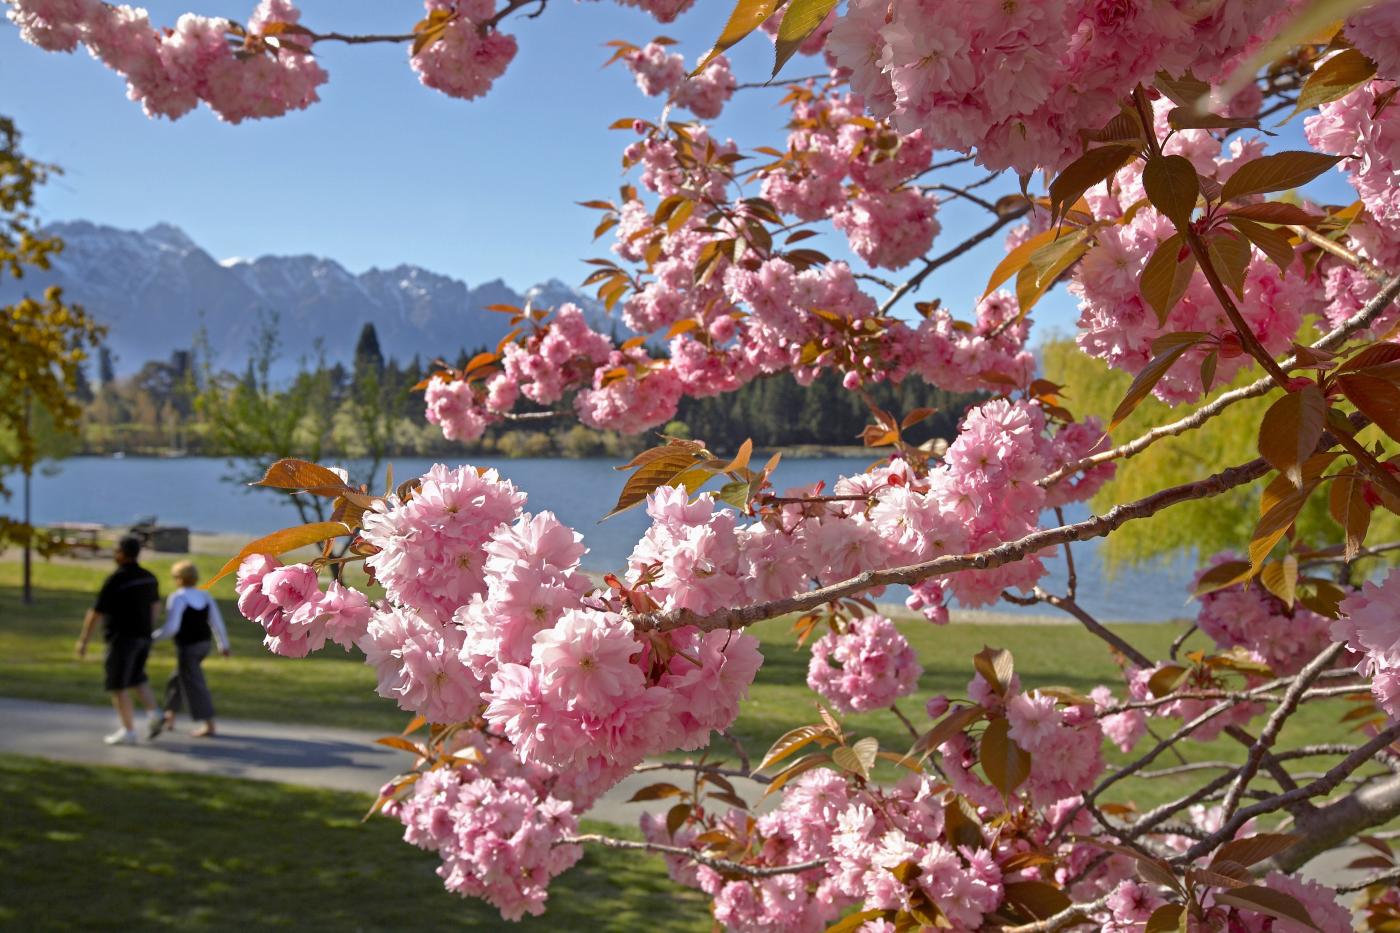 Cherry blossoms in bloom with the Remarkables mountain range in the background